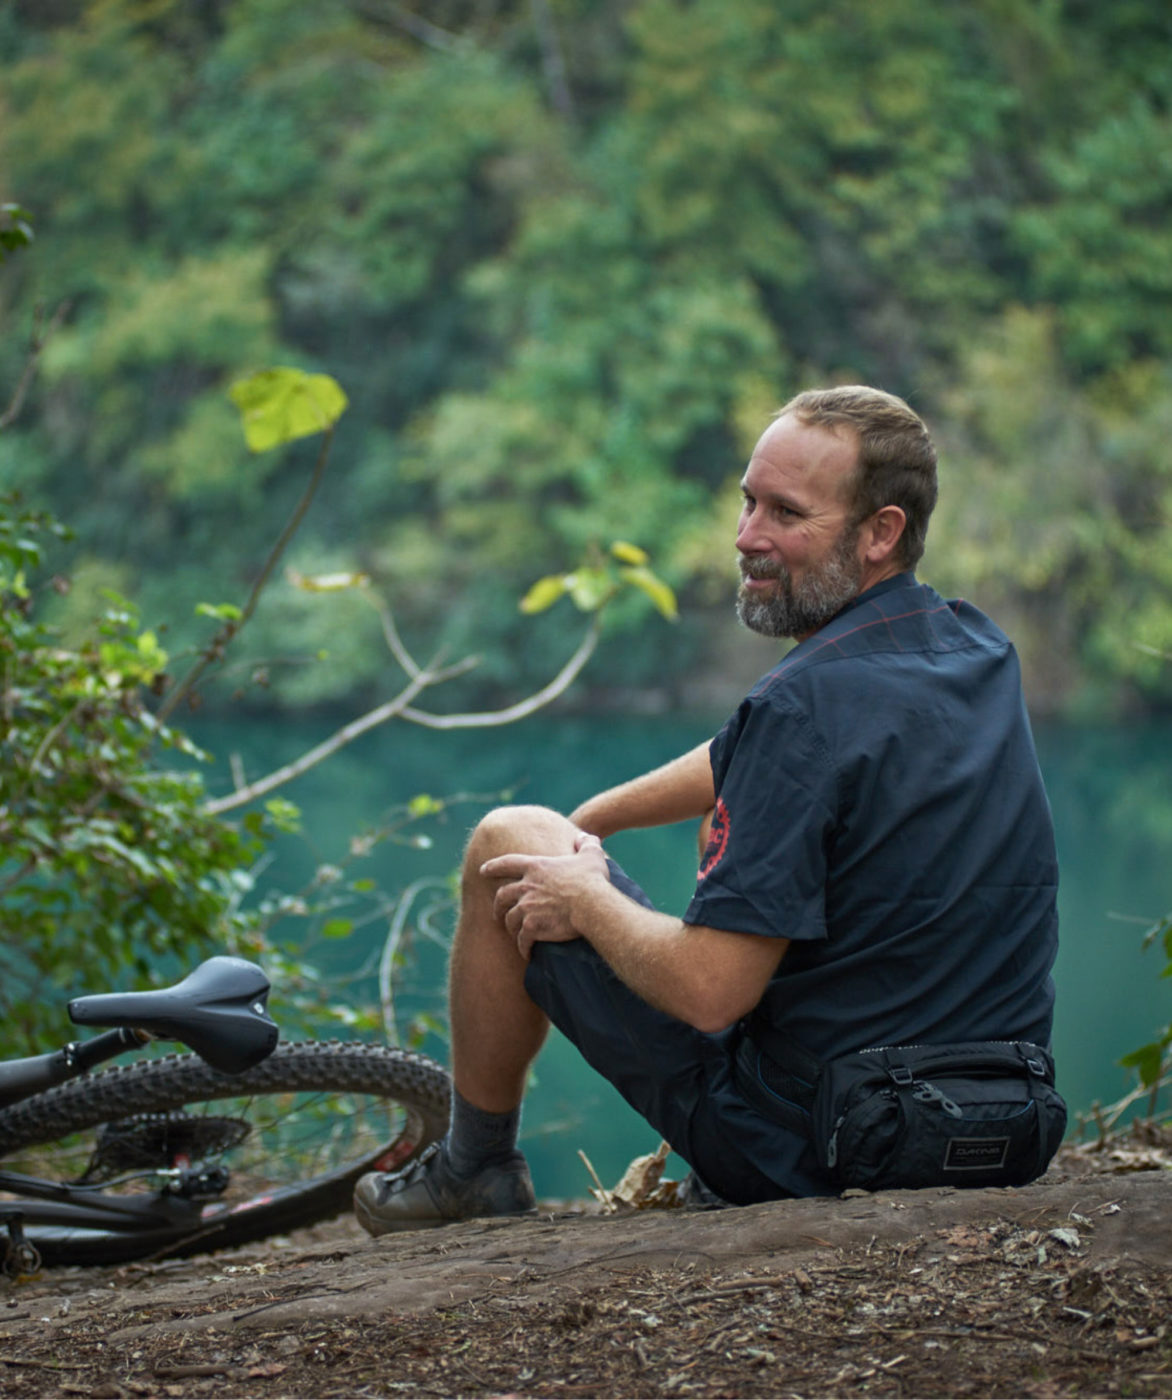 A man is seated on the ground next to his bicycle, overlooking the quarry lake and trees in the distance.